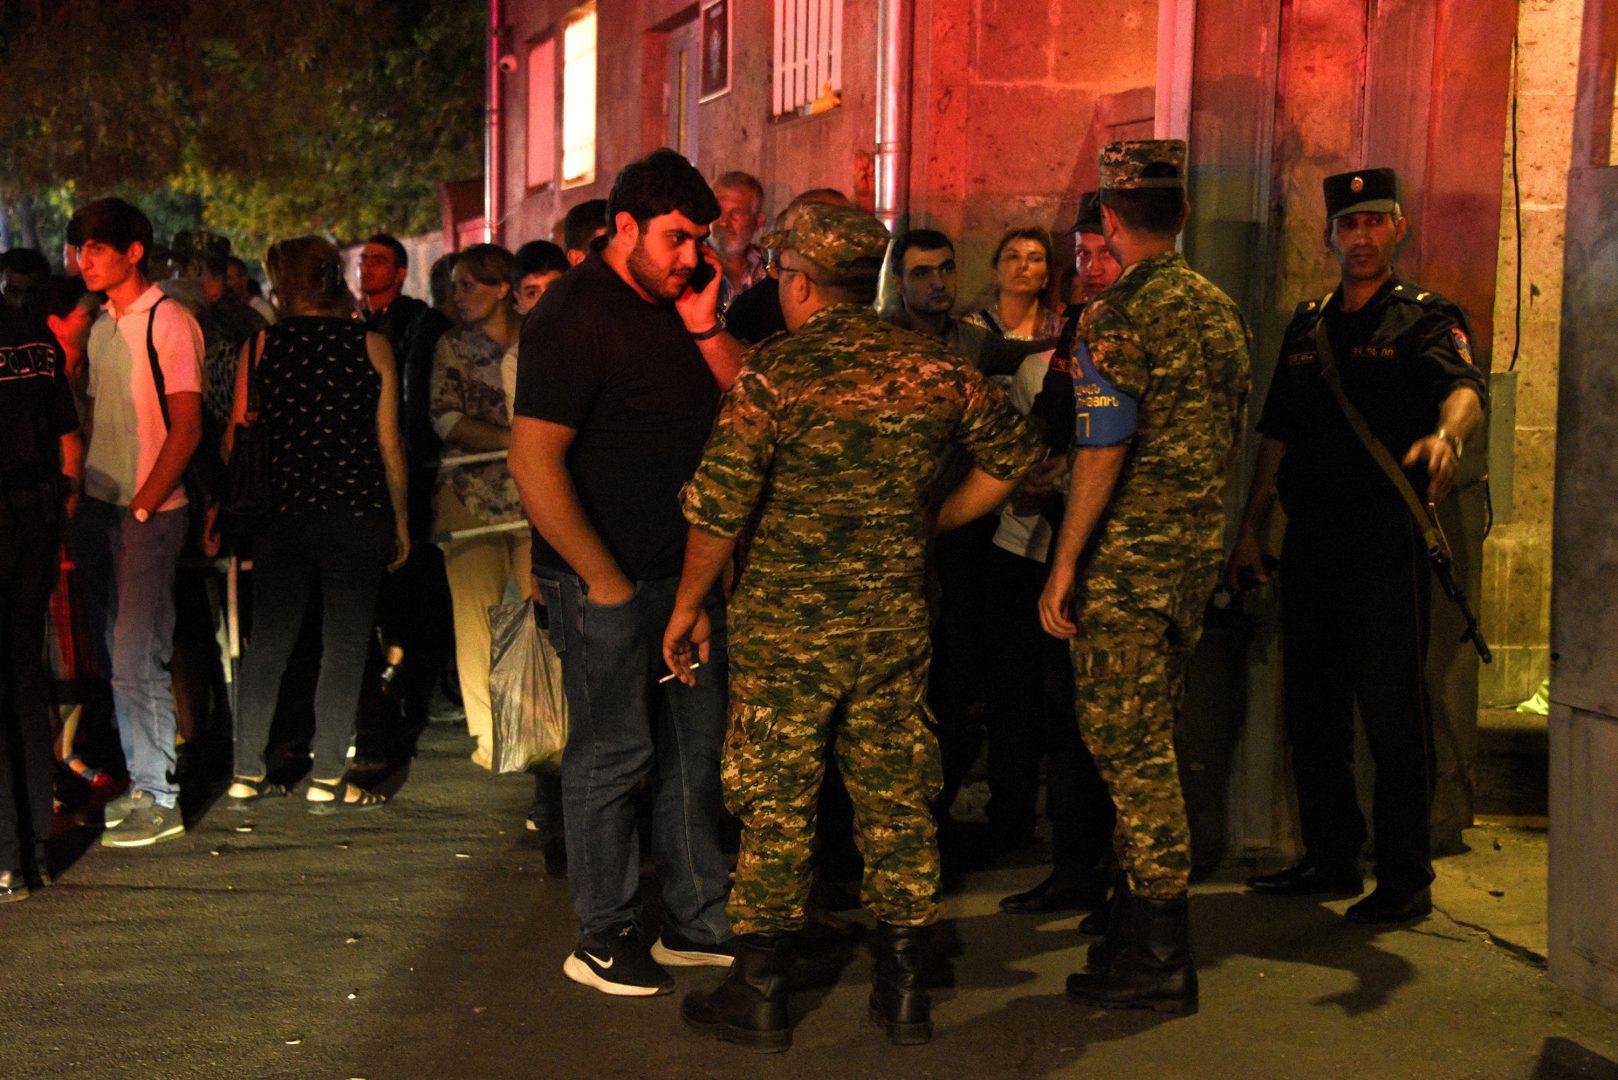 Relatives of servicemen, who were wounded in night border clashes between Armenia and Azerbaijan, gather outside a military hospital on Sept. 13, 2022, in Yerevan, Armenia. (Karen Minasyan/AFP/Getty Images/TNS)